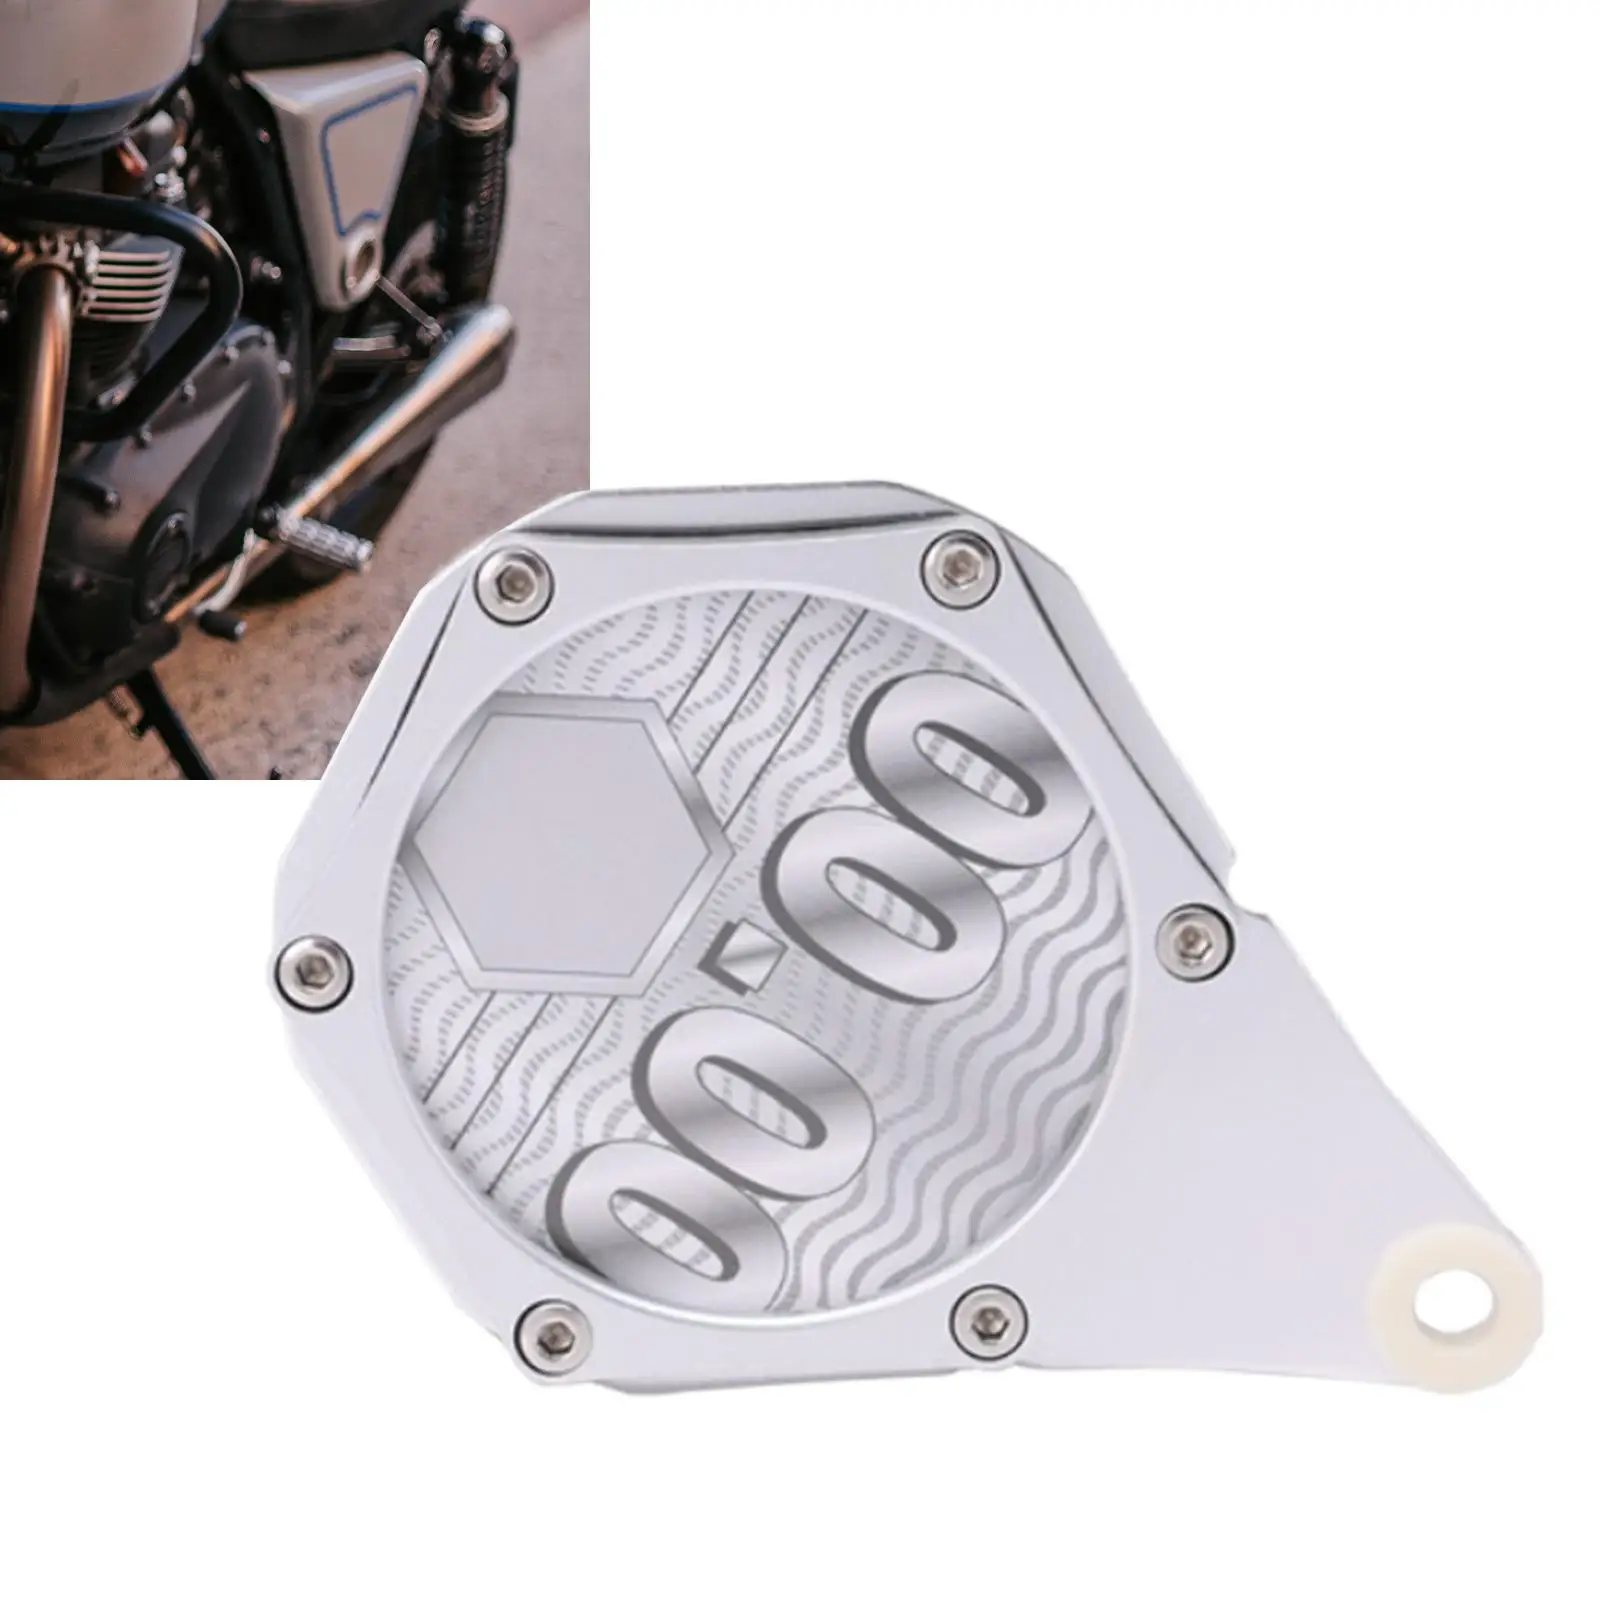 Tax Disc Plate Waterproof Tax Disc Tube for Bike Scooter Replaces